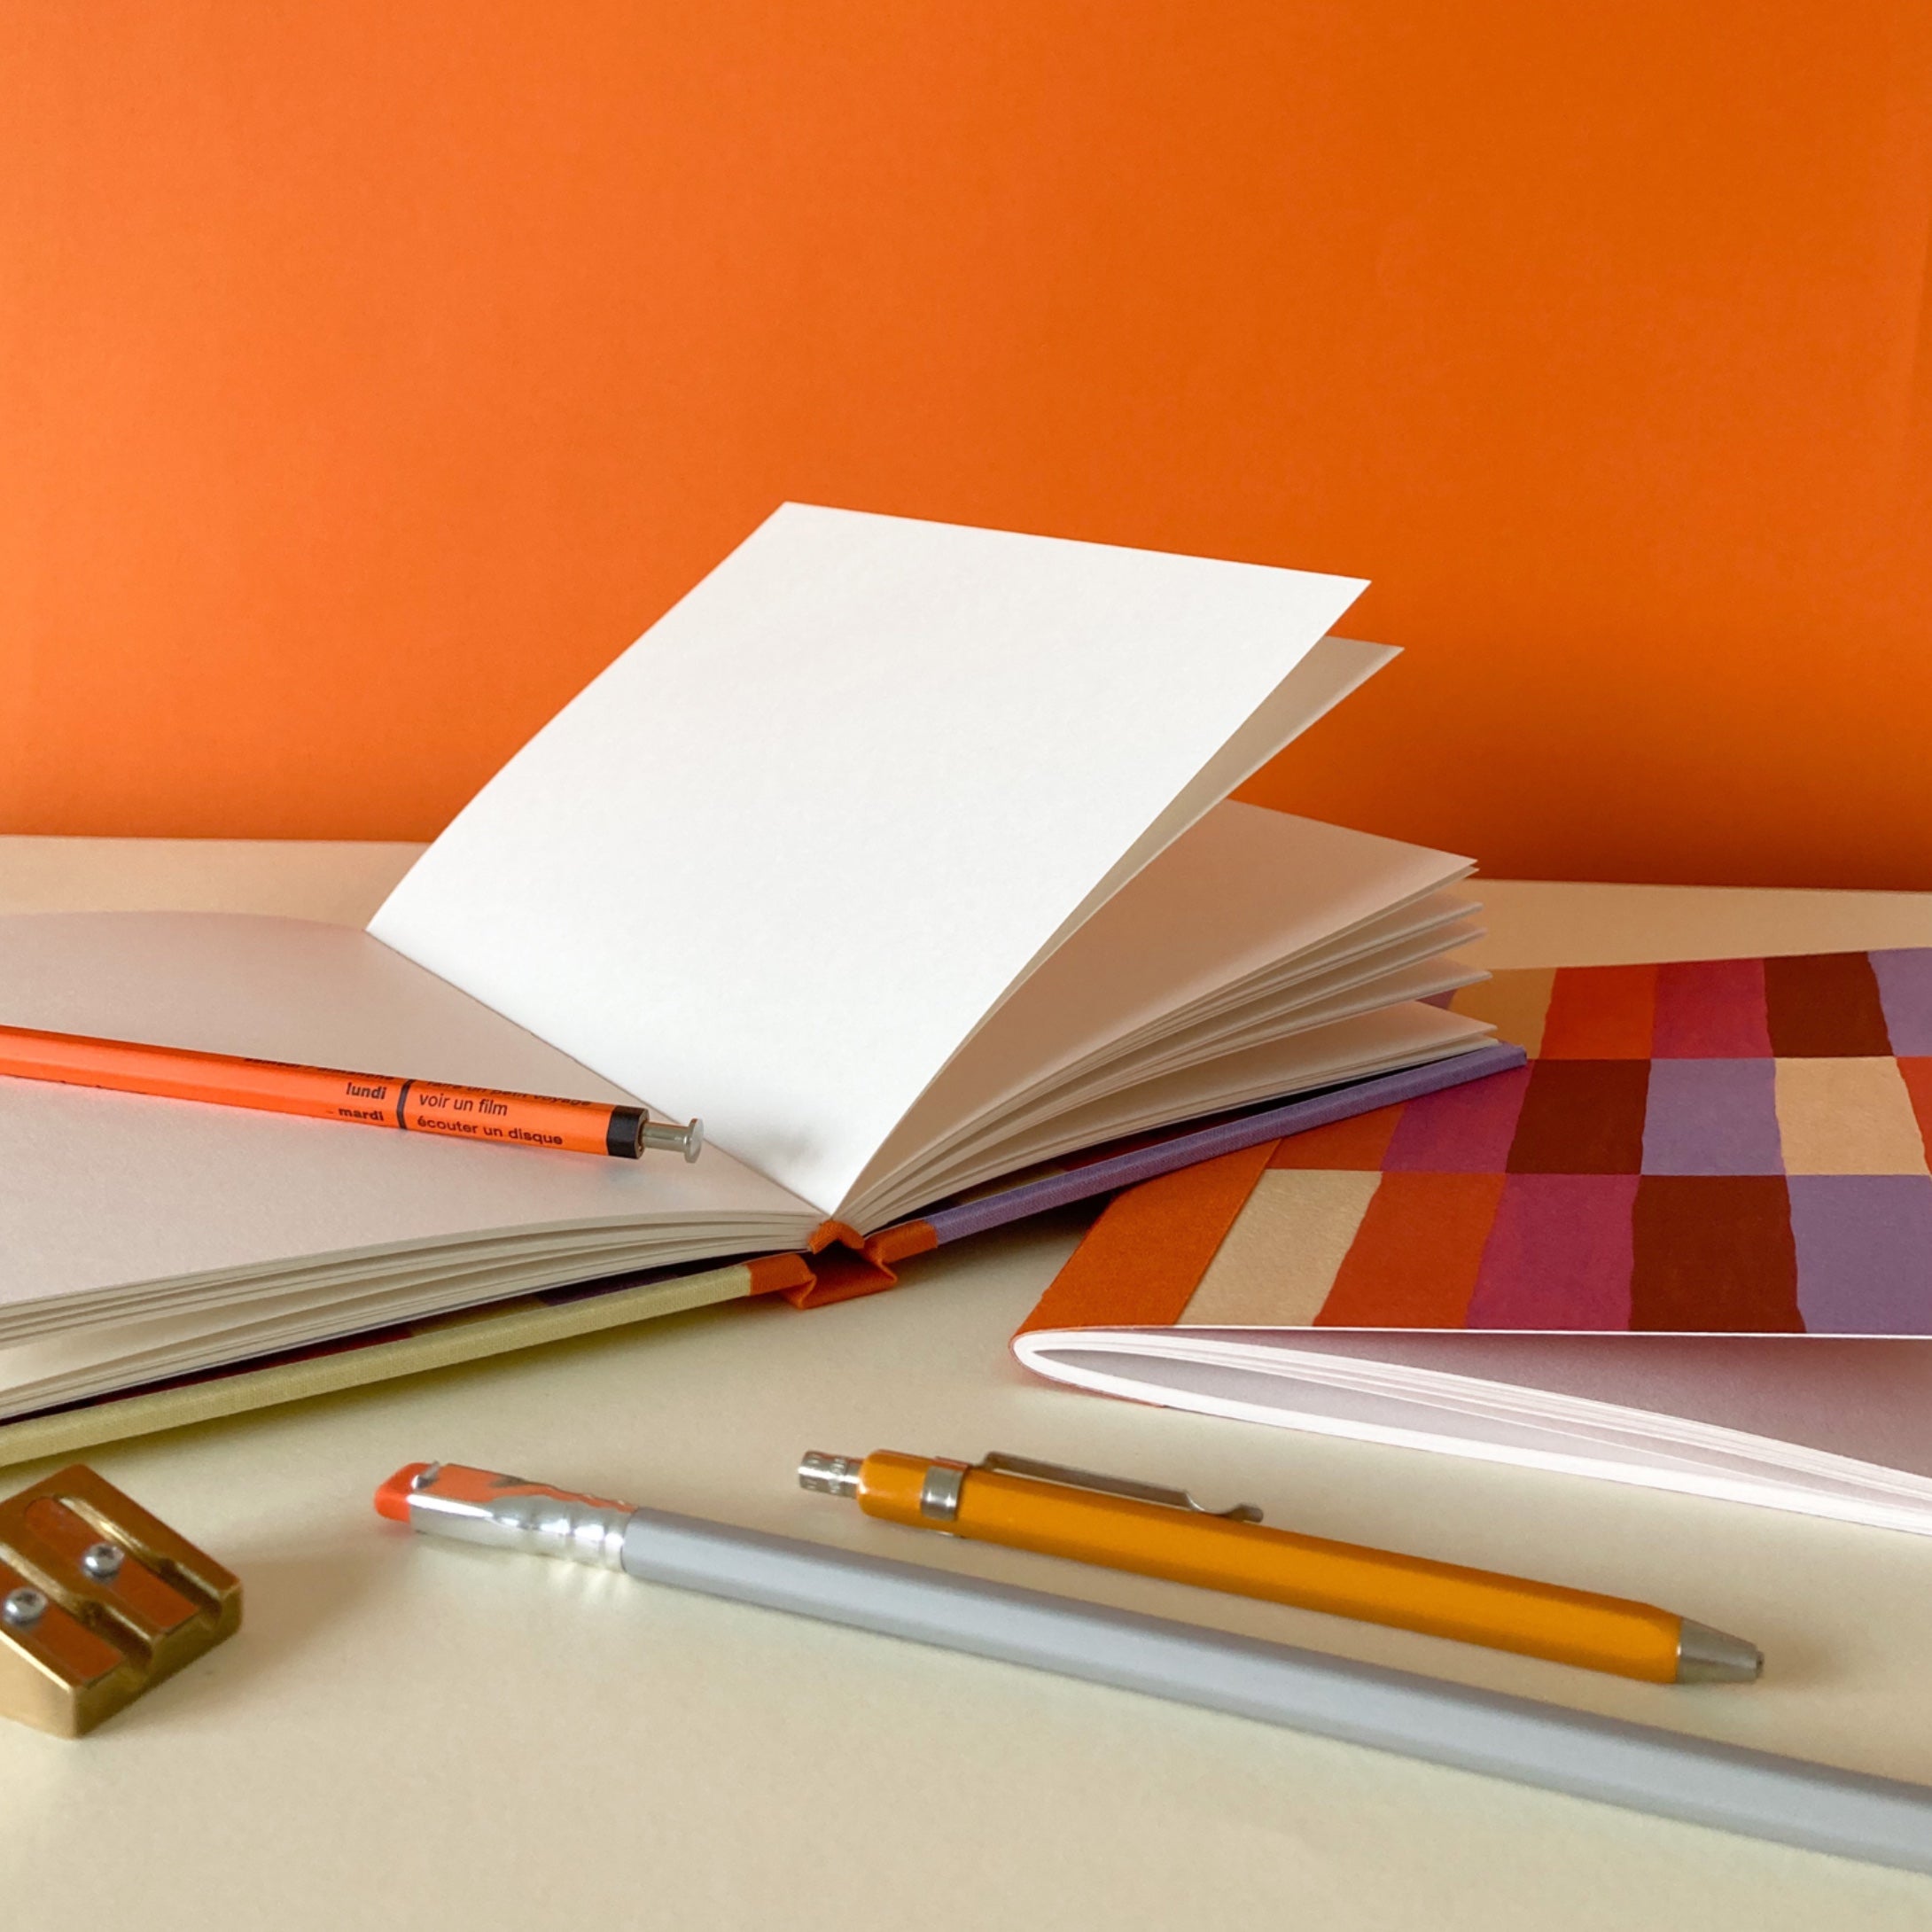 Why Our Softcover Sketchbooks and Notebooks are so Great! – Odd Orange